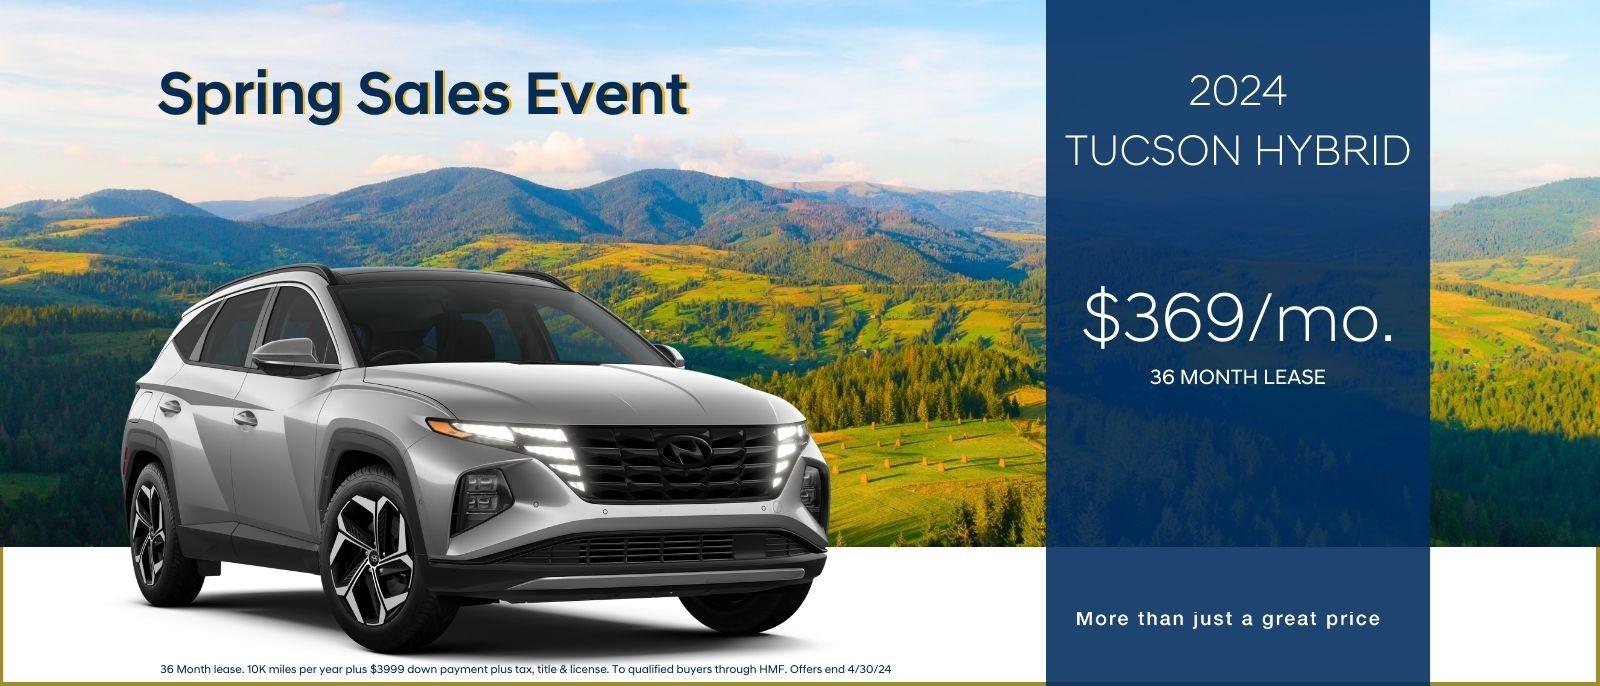 Spring Sales Event 

2024 Tucson Hybrid
$369/mo. 36 month lease

More than just a great price